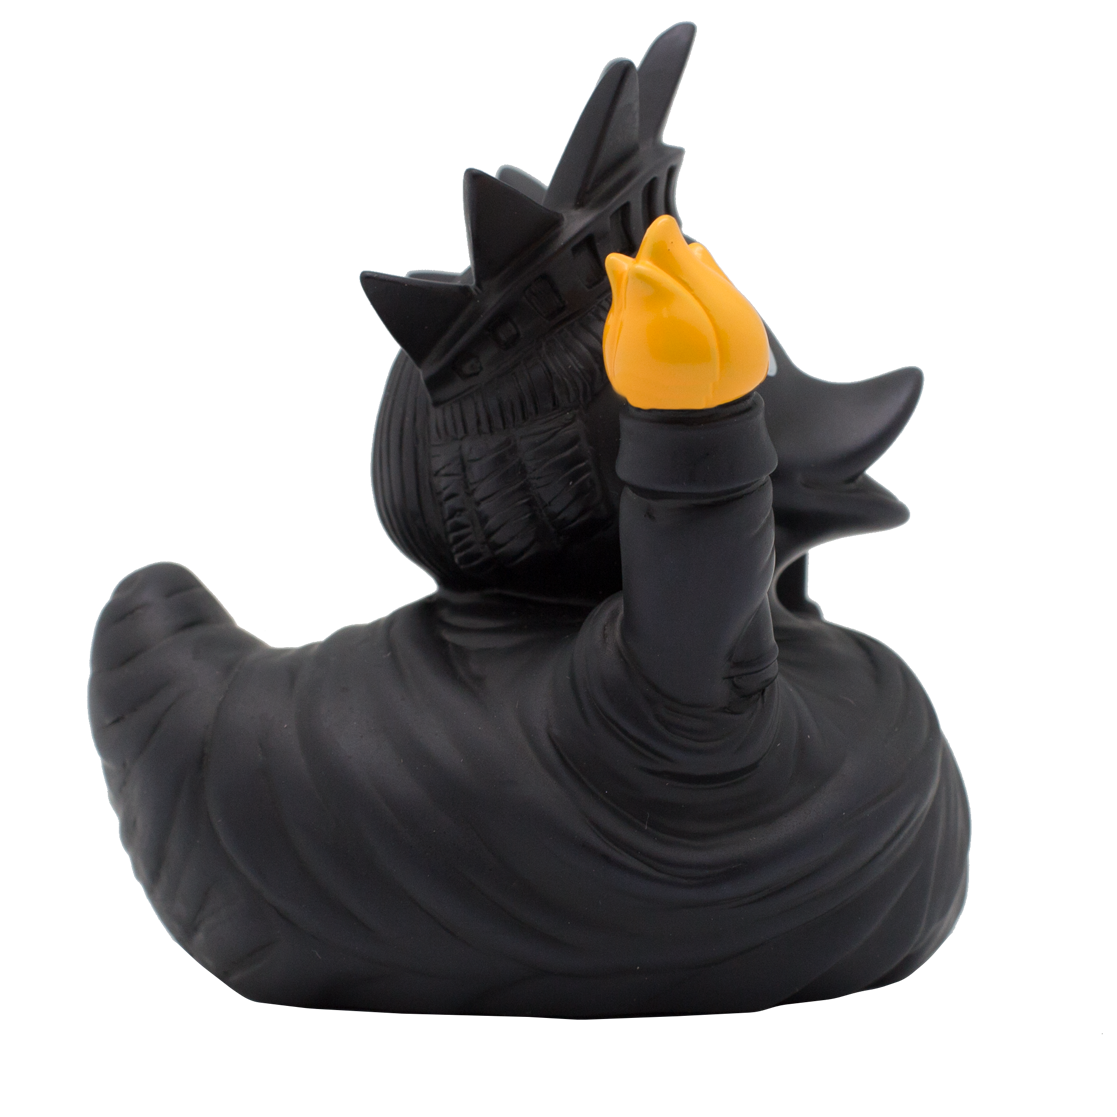 Duck Statue of Black Freedom